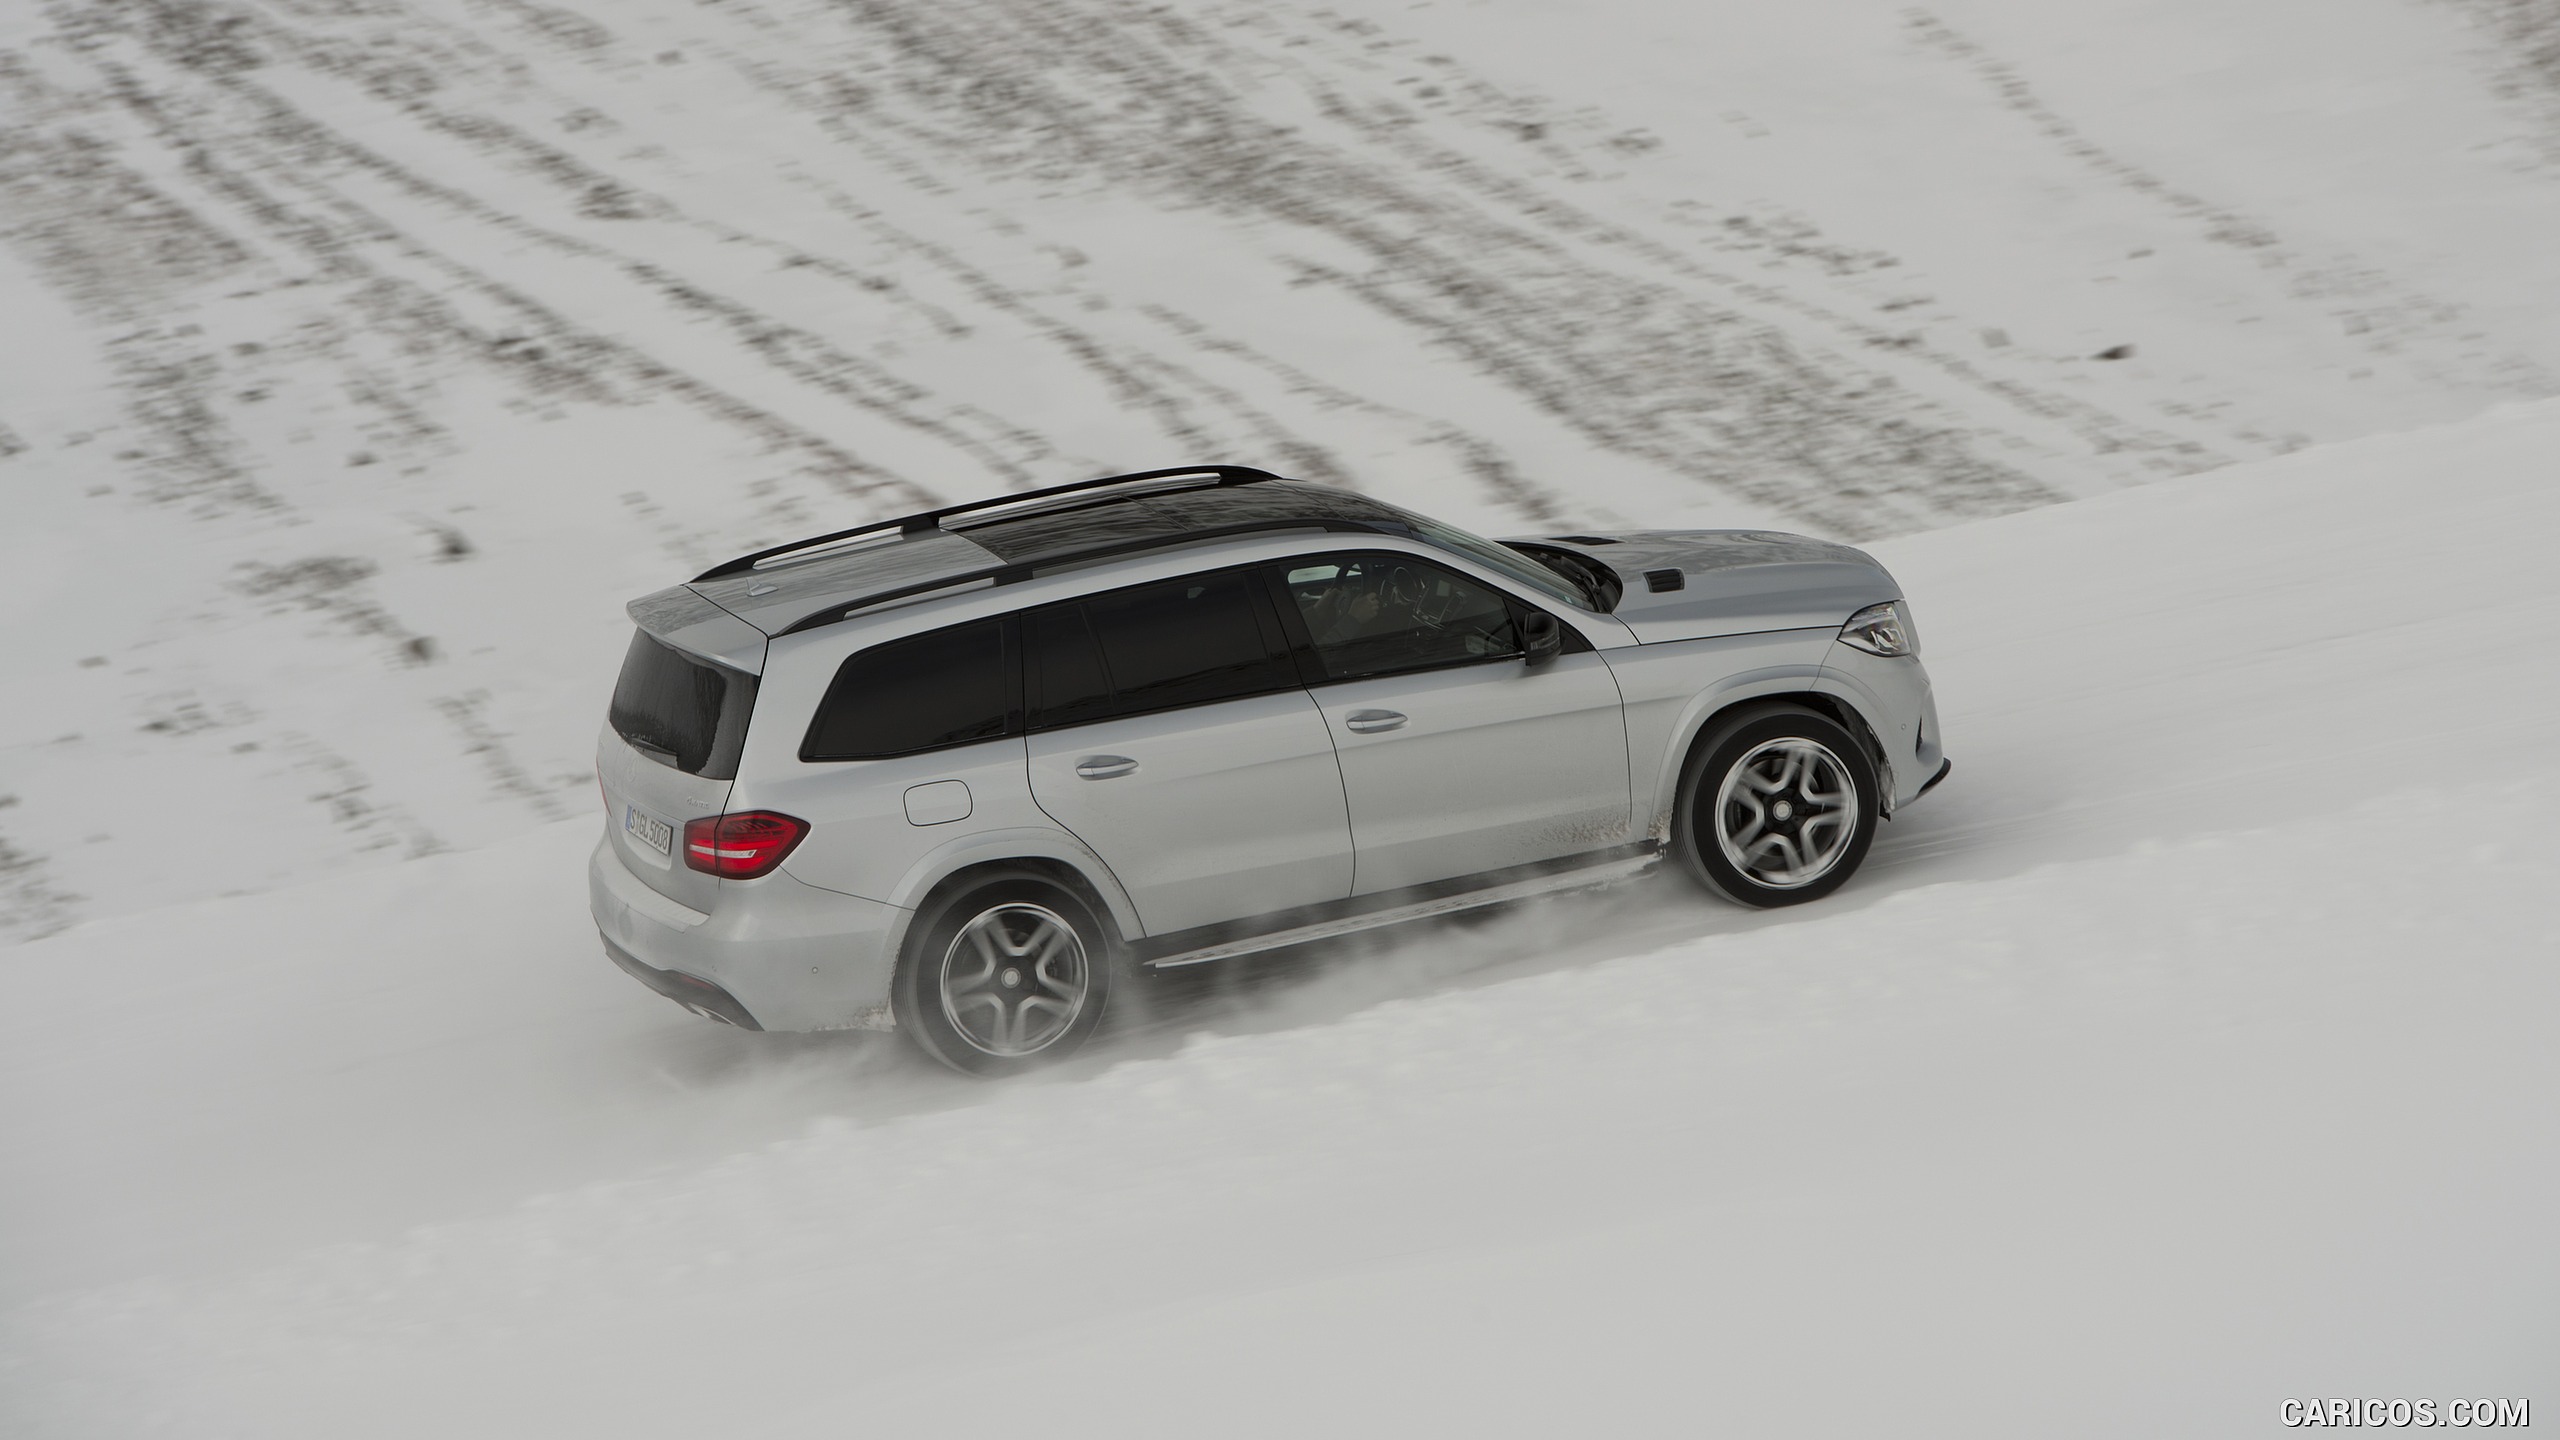 2017 Mercedes-Benz GLS 500 4MATIC AMG Line in Snow - Side, #154 of 255